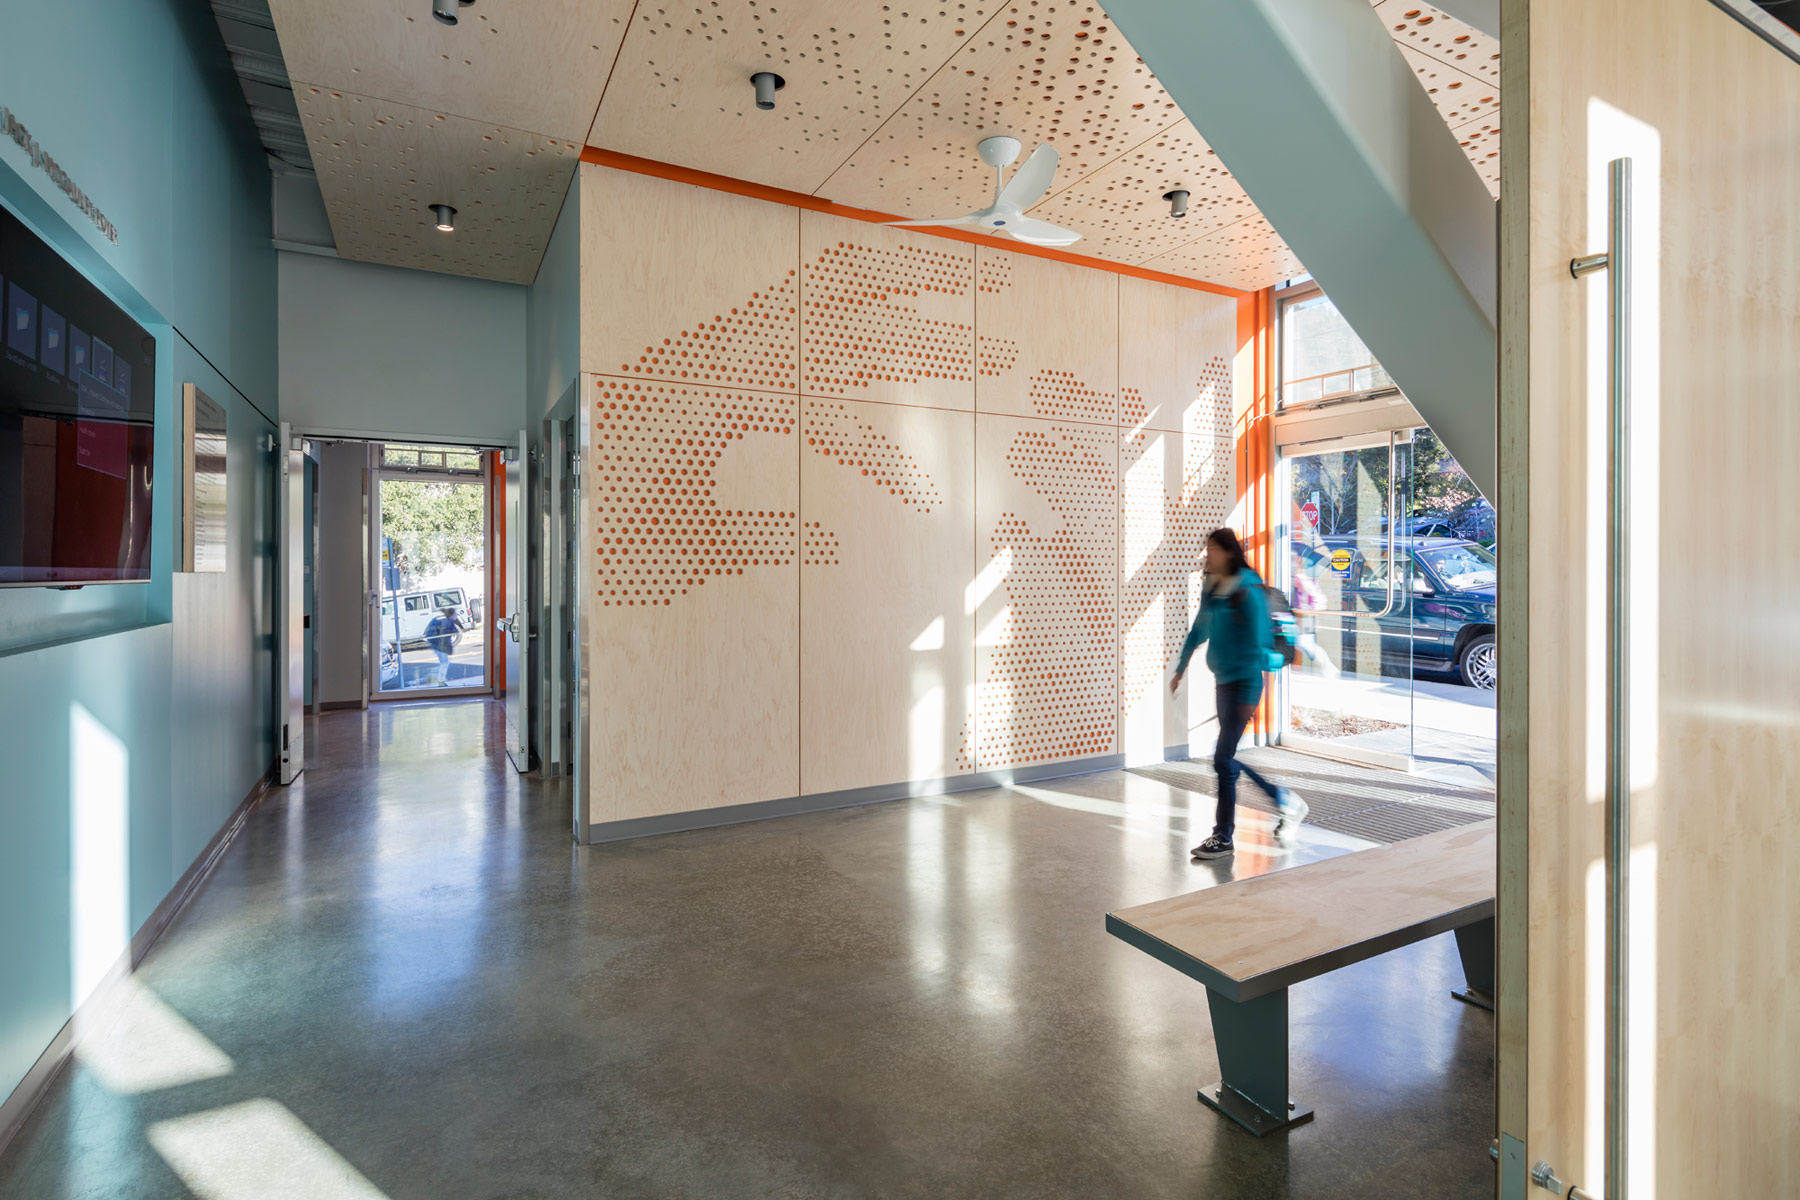 The Jacobs Institute for Design Innovation is a beacon of sustainable innovation at the UC Berkeley campus in the Bay Area, providing a variety of flexible maker spaces that foster interdisciplinary, collaborative creativity.